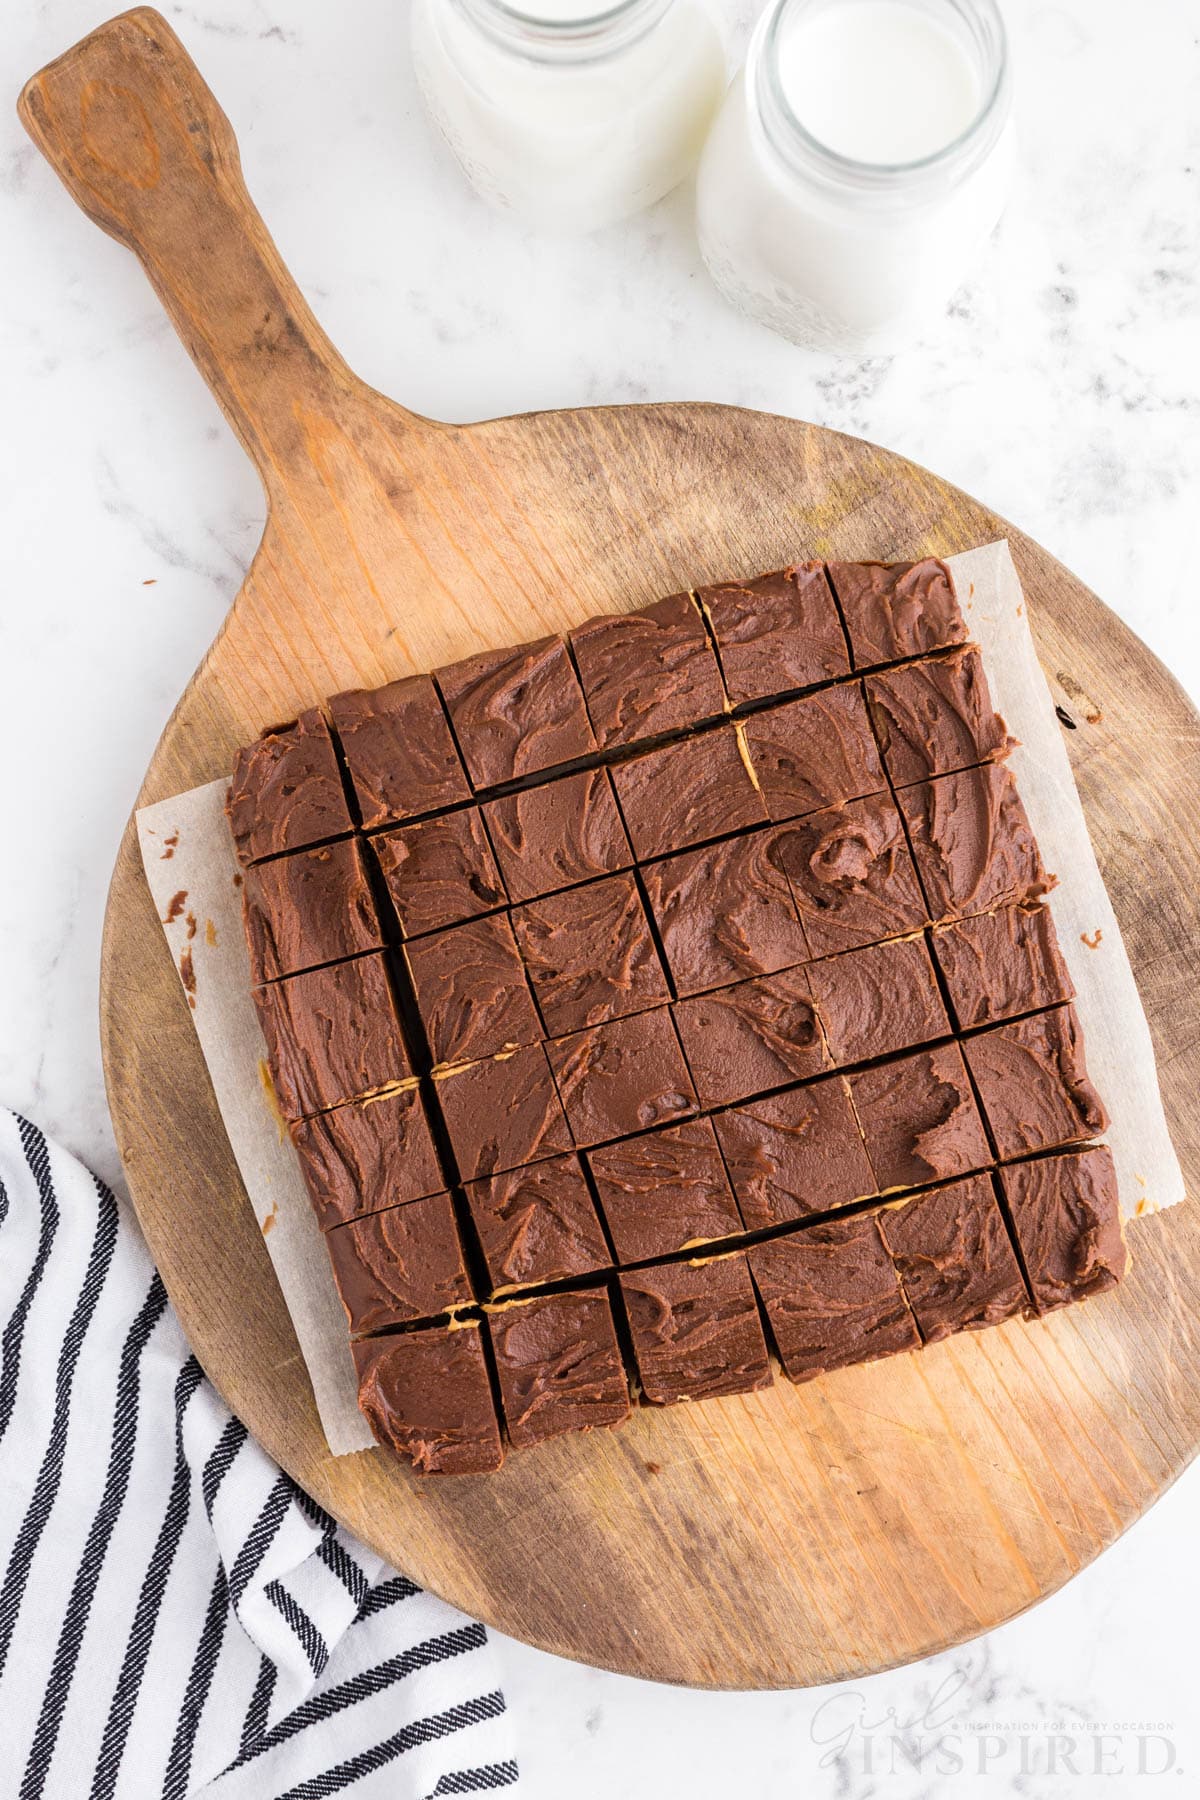 Hardened chocolate peanut butter fudge cut into square pieces on a wooden kitchen board, striped linen, two jars of milk, on a marble countertop.